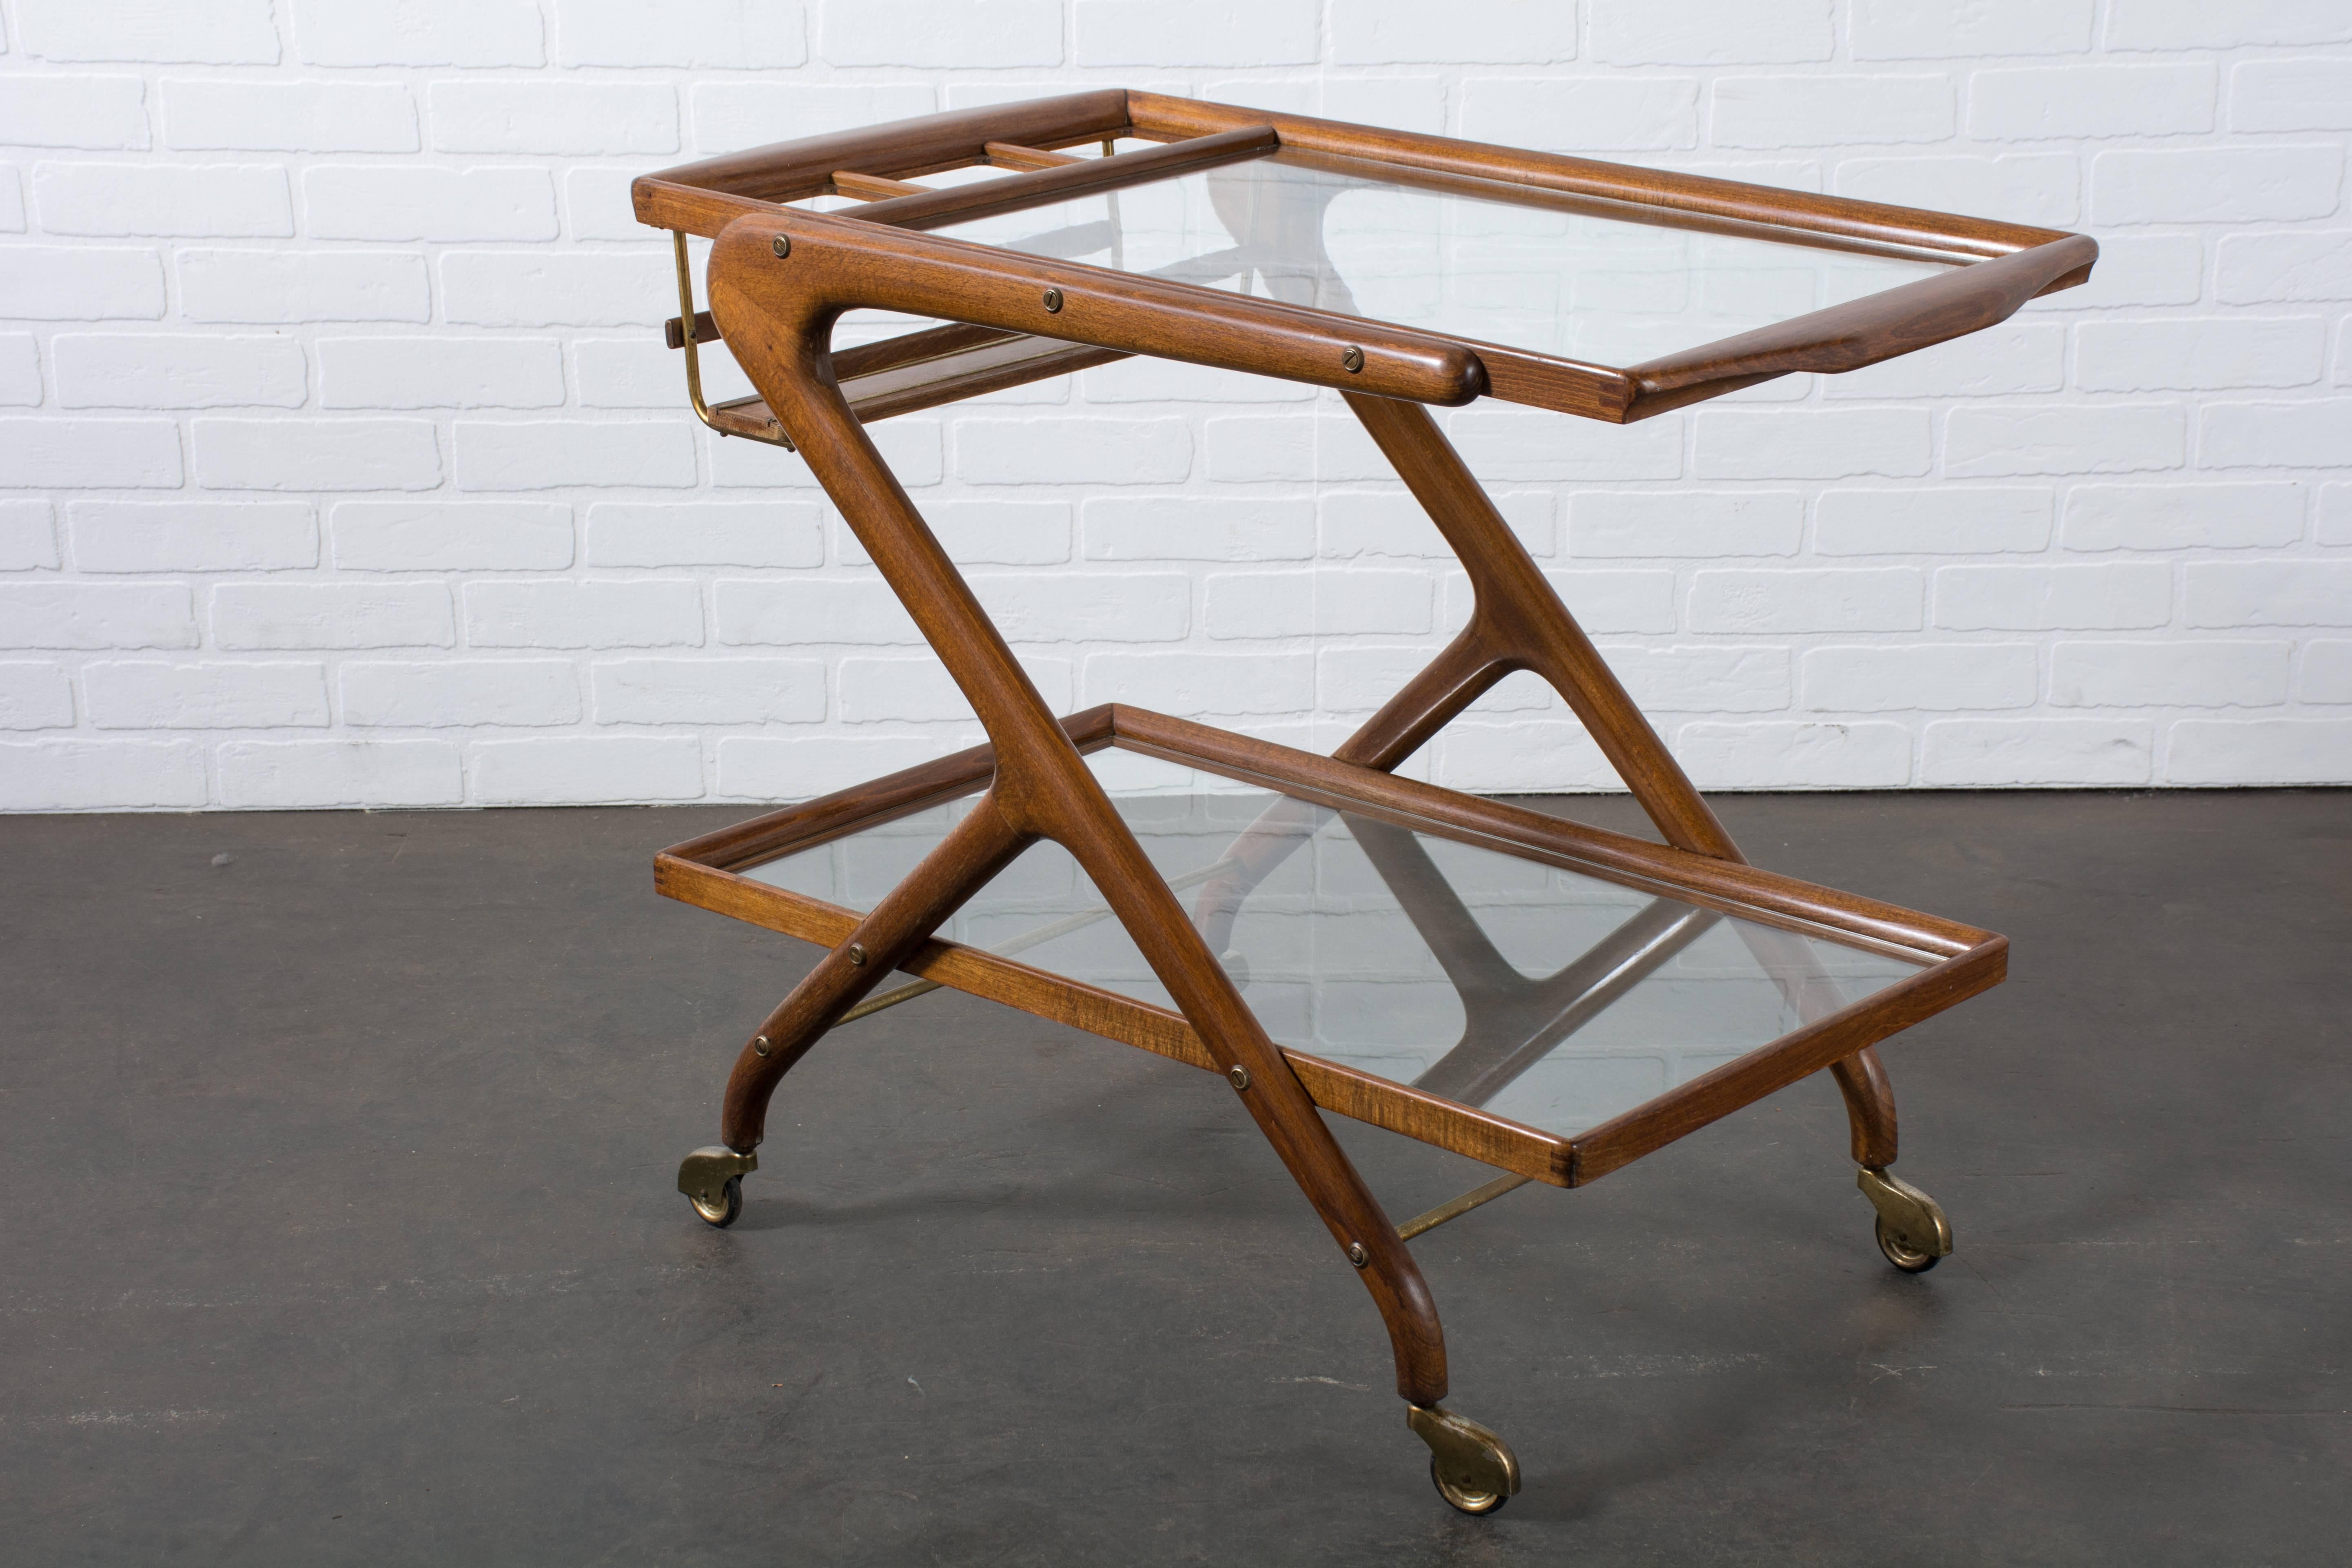 This vintage Mid-Century bar cart was designed by Cesare Lacca, Italy, circa 1950s. It features a sculptural walnut frame, two glass shelves, slots for bottles and metal details with a brass finish. This cart rests on four casters, so it can be